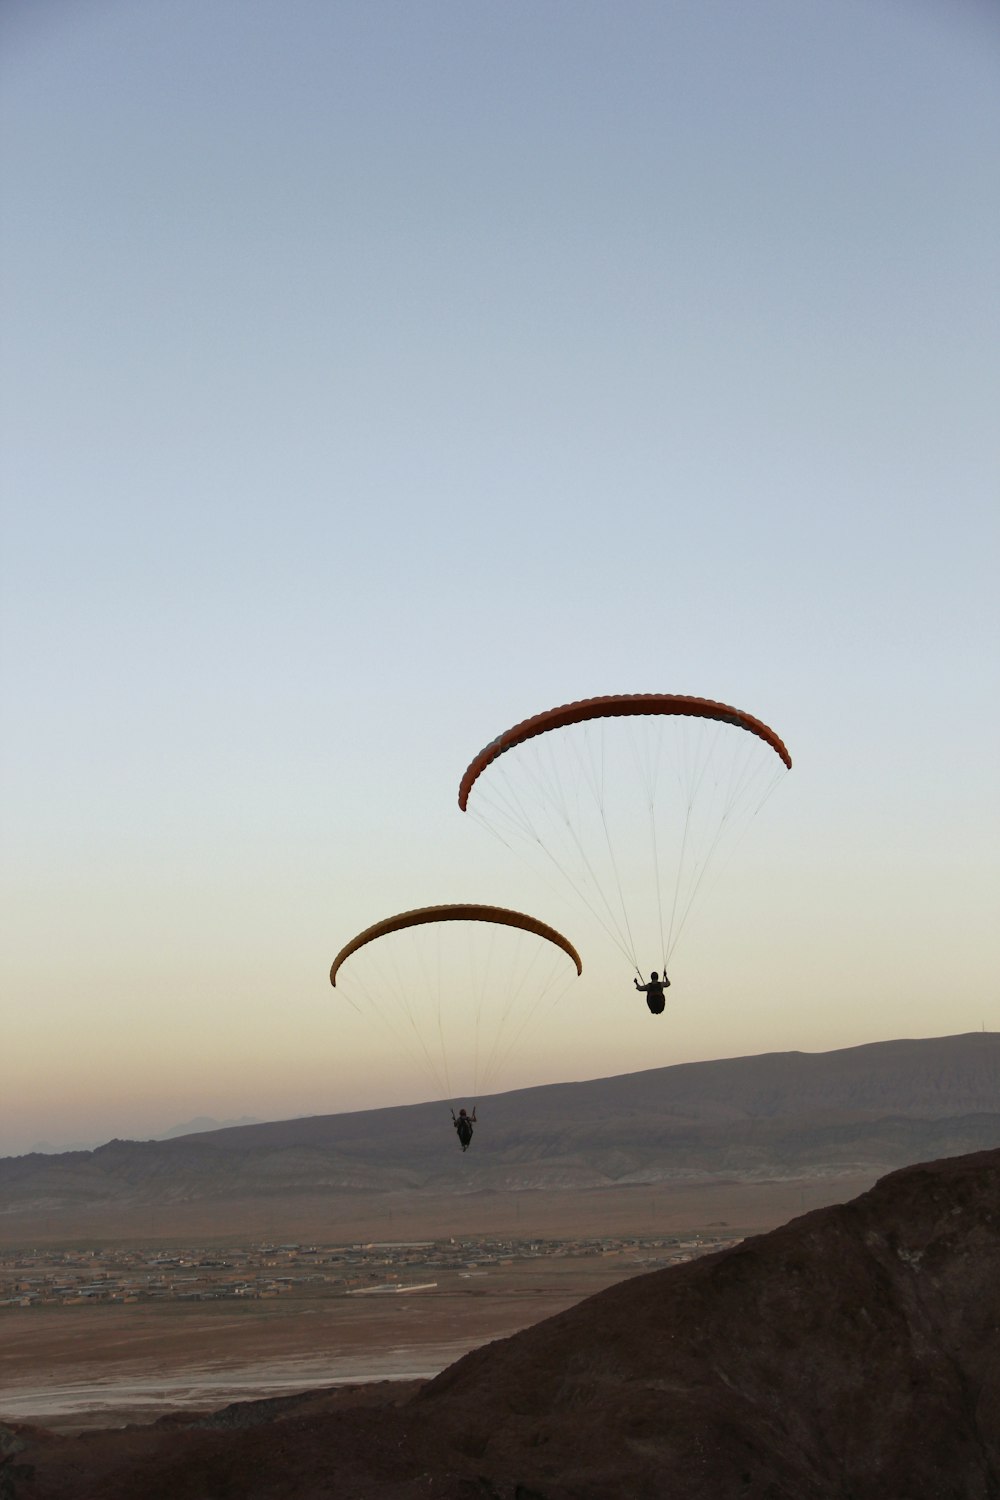 two parasailers in the air over a desert landscape